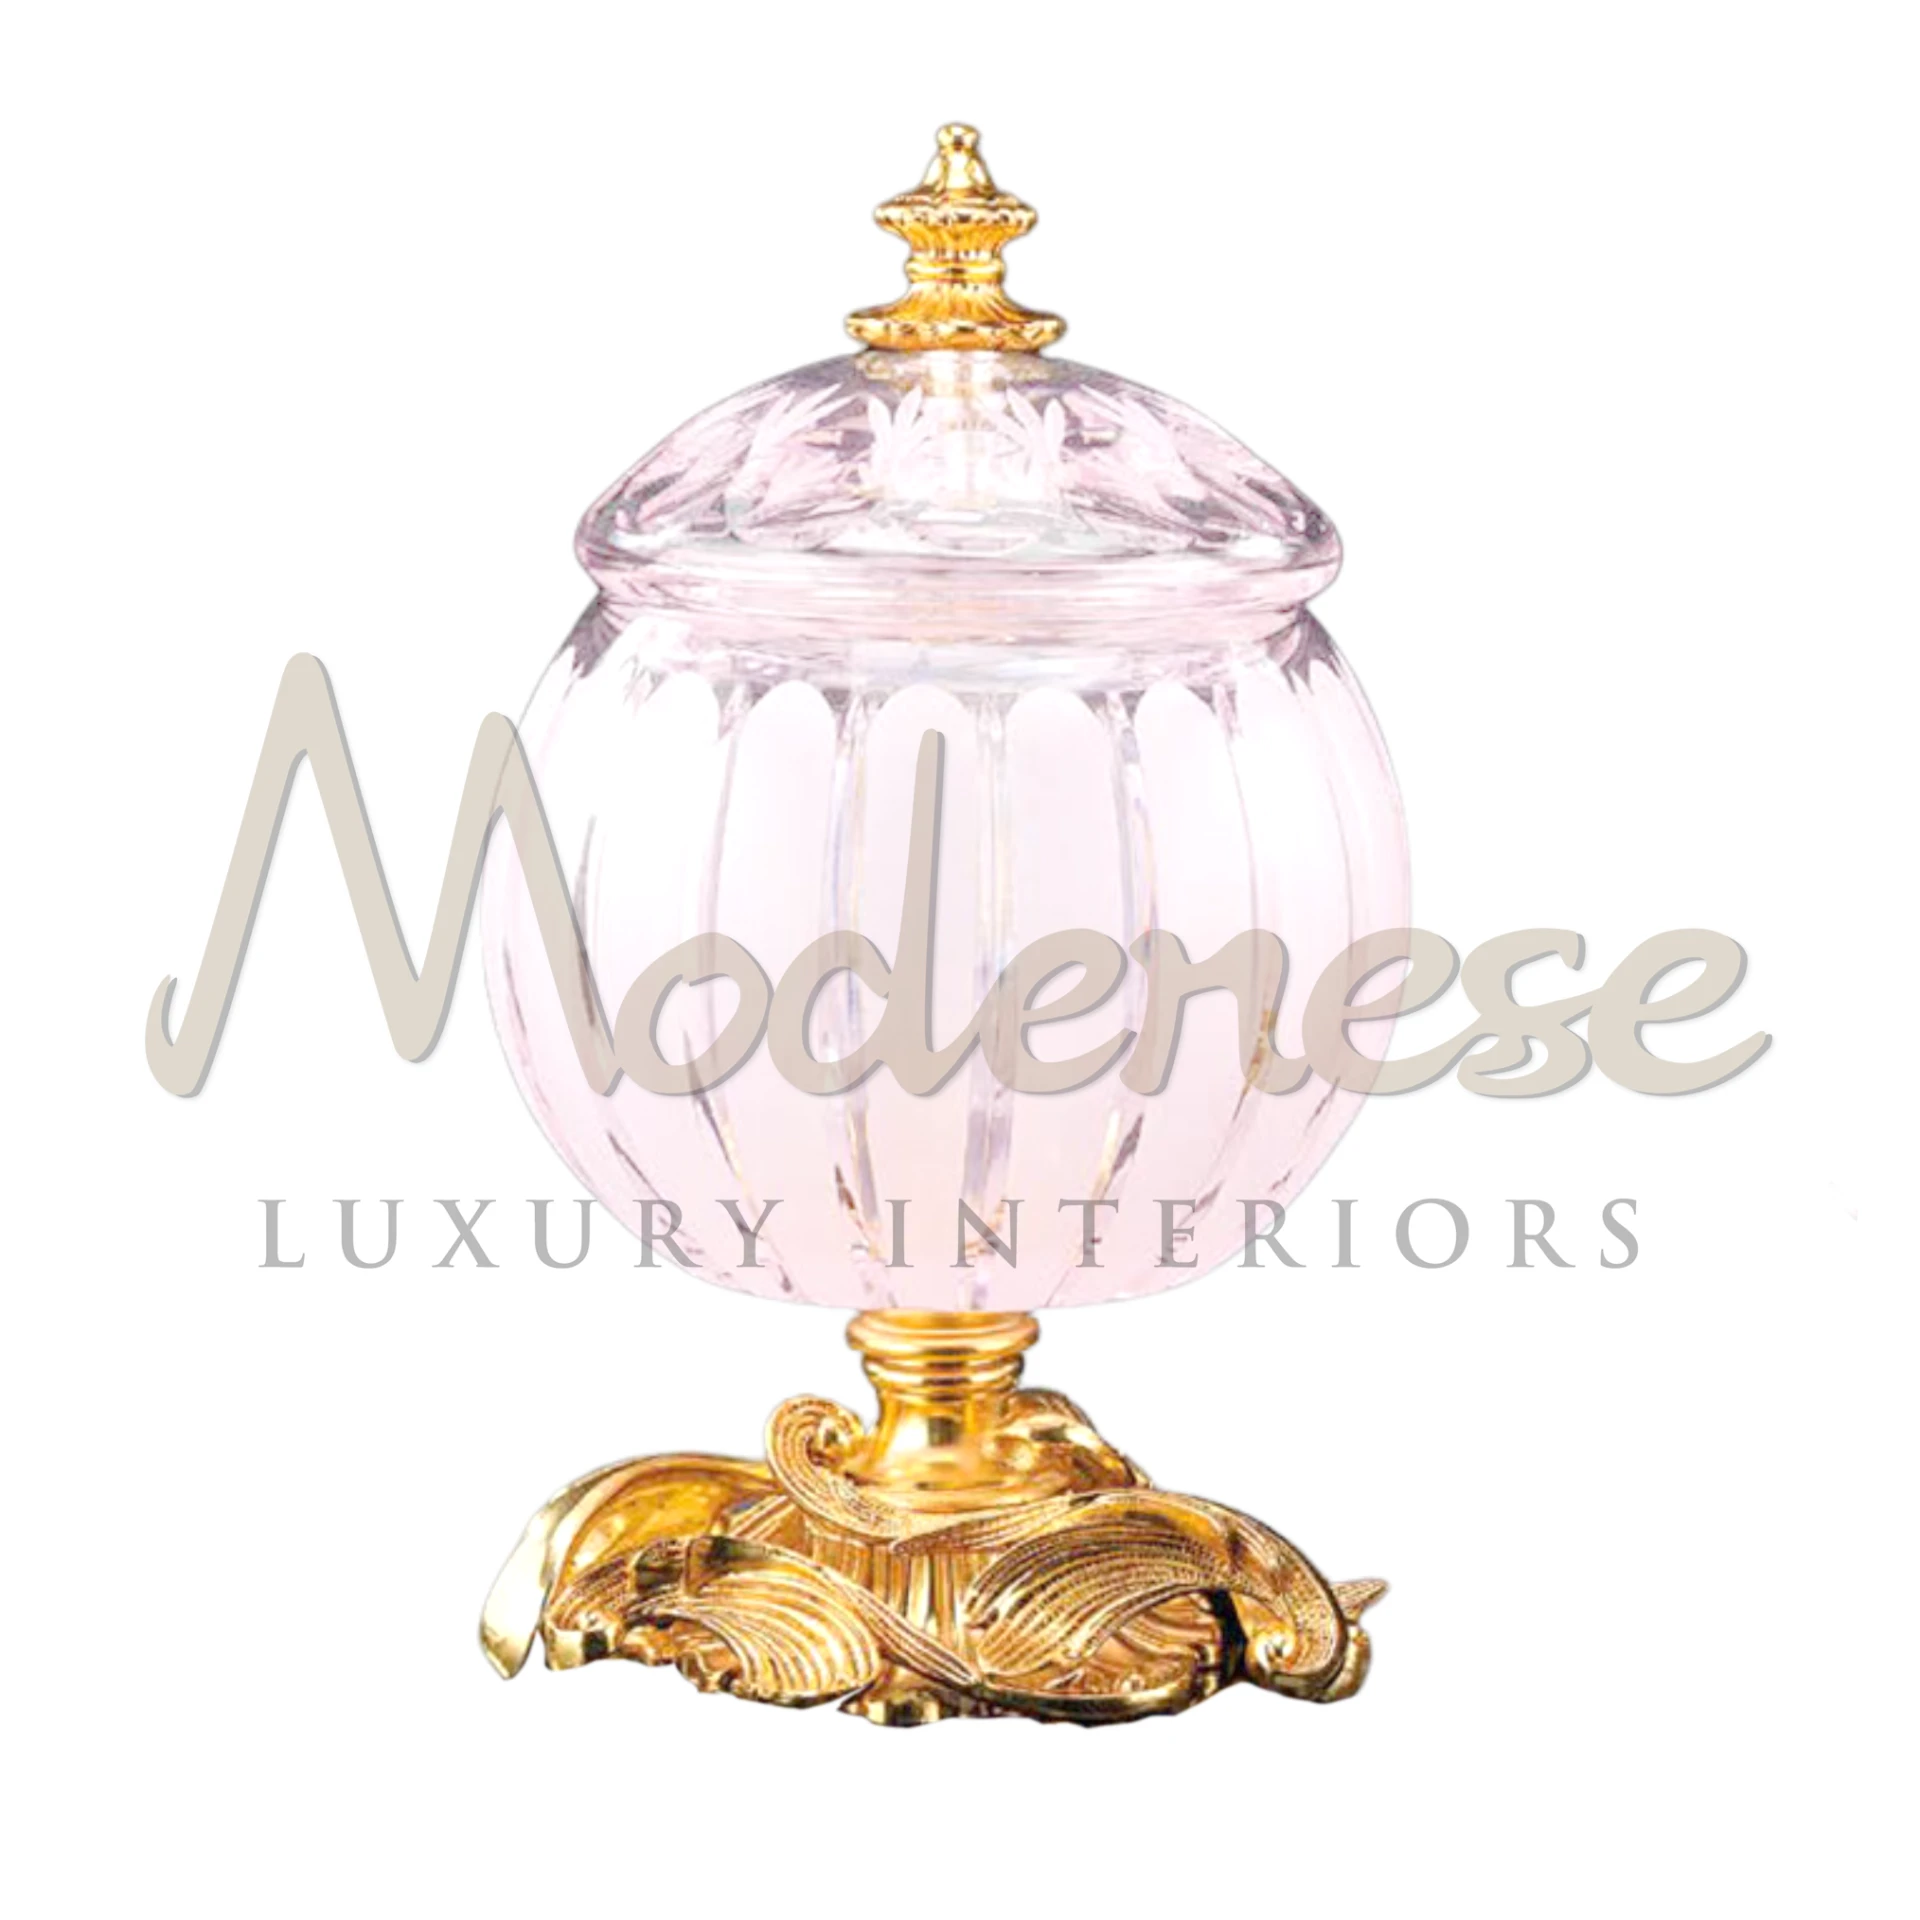 Royal Pink Glass Box, adorned with etched designs and metallic accents, serves as an elegant storage and display solution for luxury interiors.